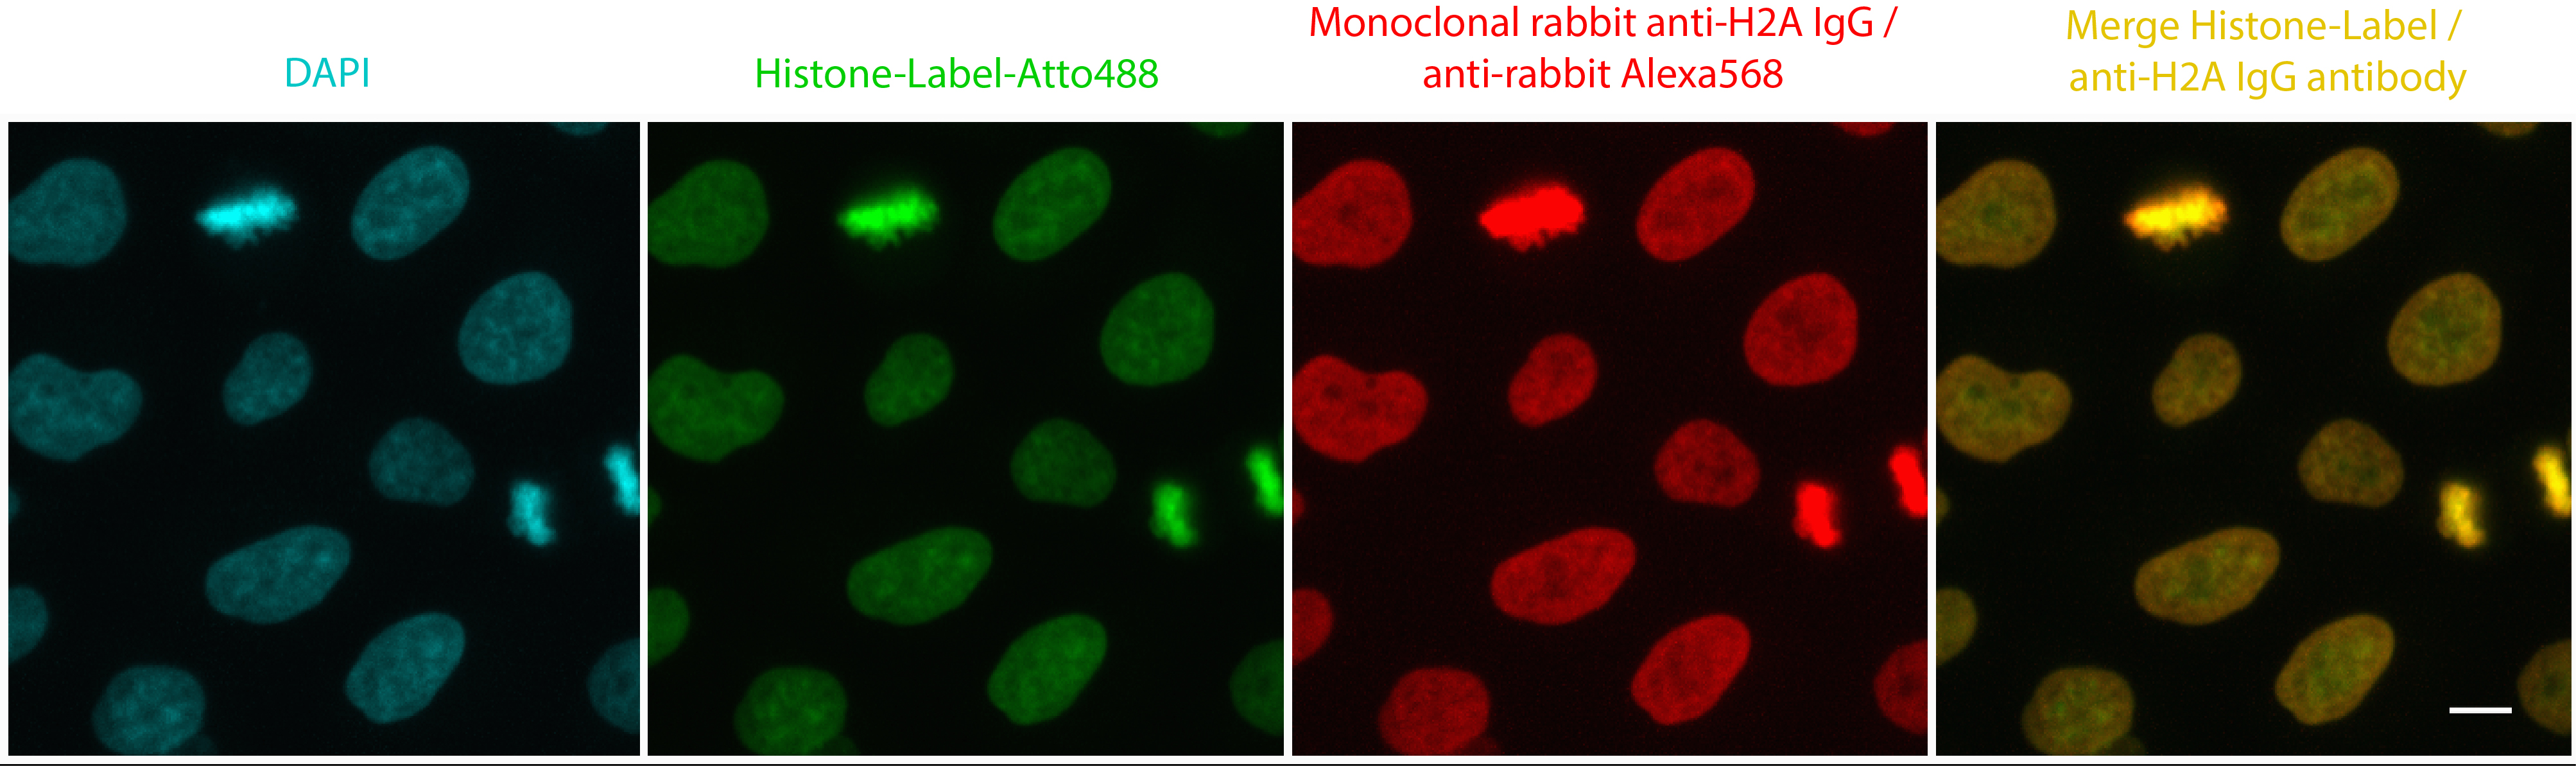 ChromoTek Histone-Label is a convenient, ready to use, and high-performing chromatin staining probe with low background levels and that differentiates between euchromatin and heterochromatin. HeLa cells stained in parallel with Histone-Label (1.25 mg/L) and a monoclonal rabbit anti-H2A IgG / anti-rabbit Alexa568 secondary antibody. Histone-Label co-localizes with conventional antibody staining, however Histone-Label better penetrates into the compactly packed nuclei than the anti-H2A IgG and secondary IgGs, which are one order of magnitude larger than the Histone-Label: see more green signal from Histone-Label at center of nuclei and more red signal from anti-H2A IgG on surface/edge of nuclei of merge image on very right.